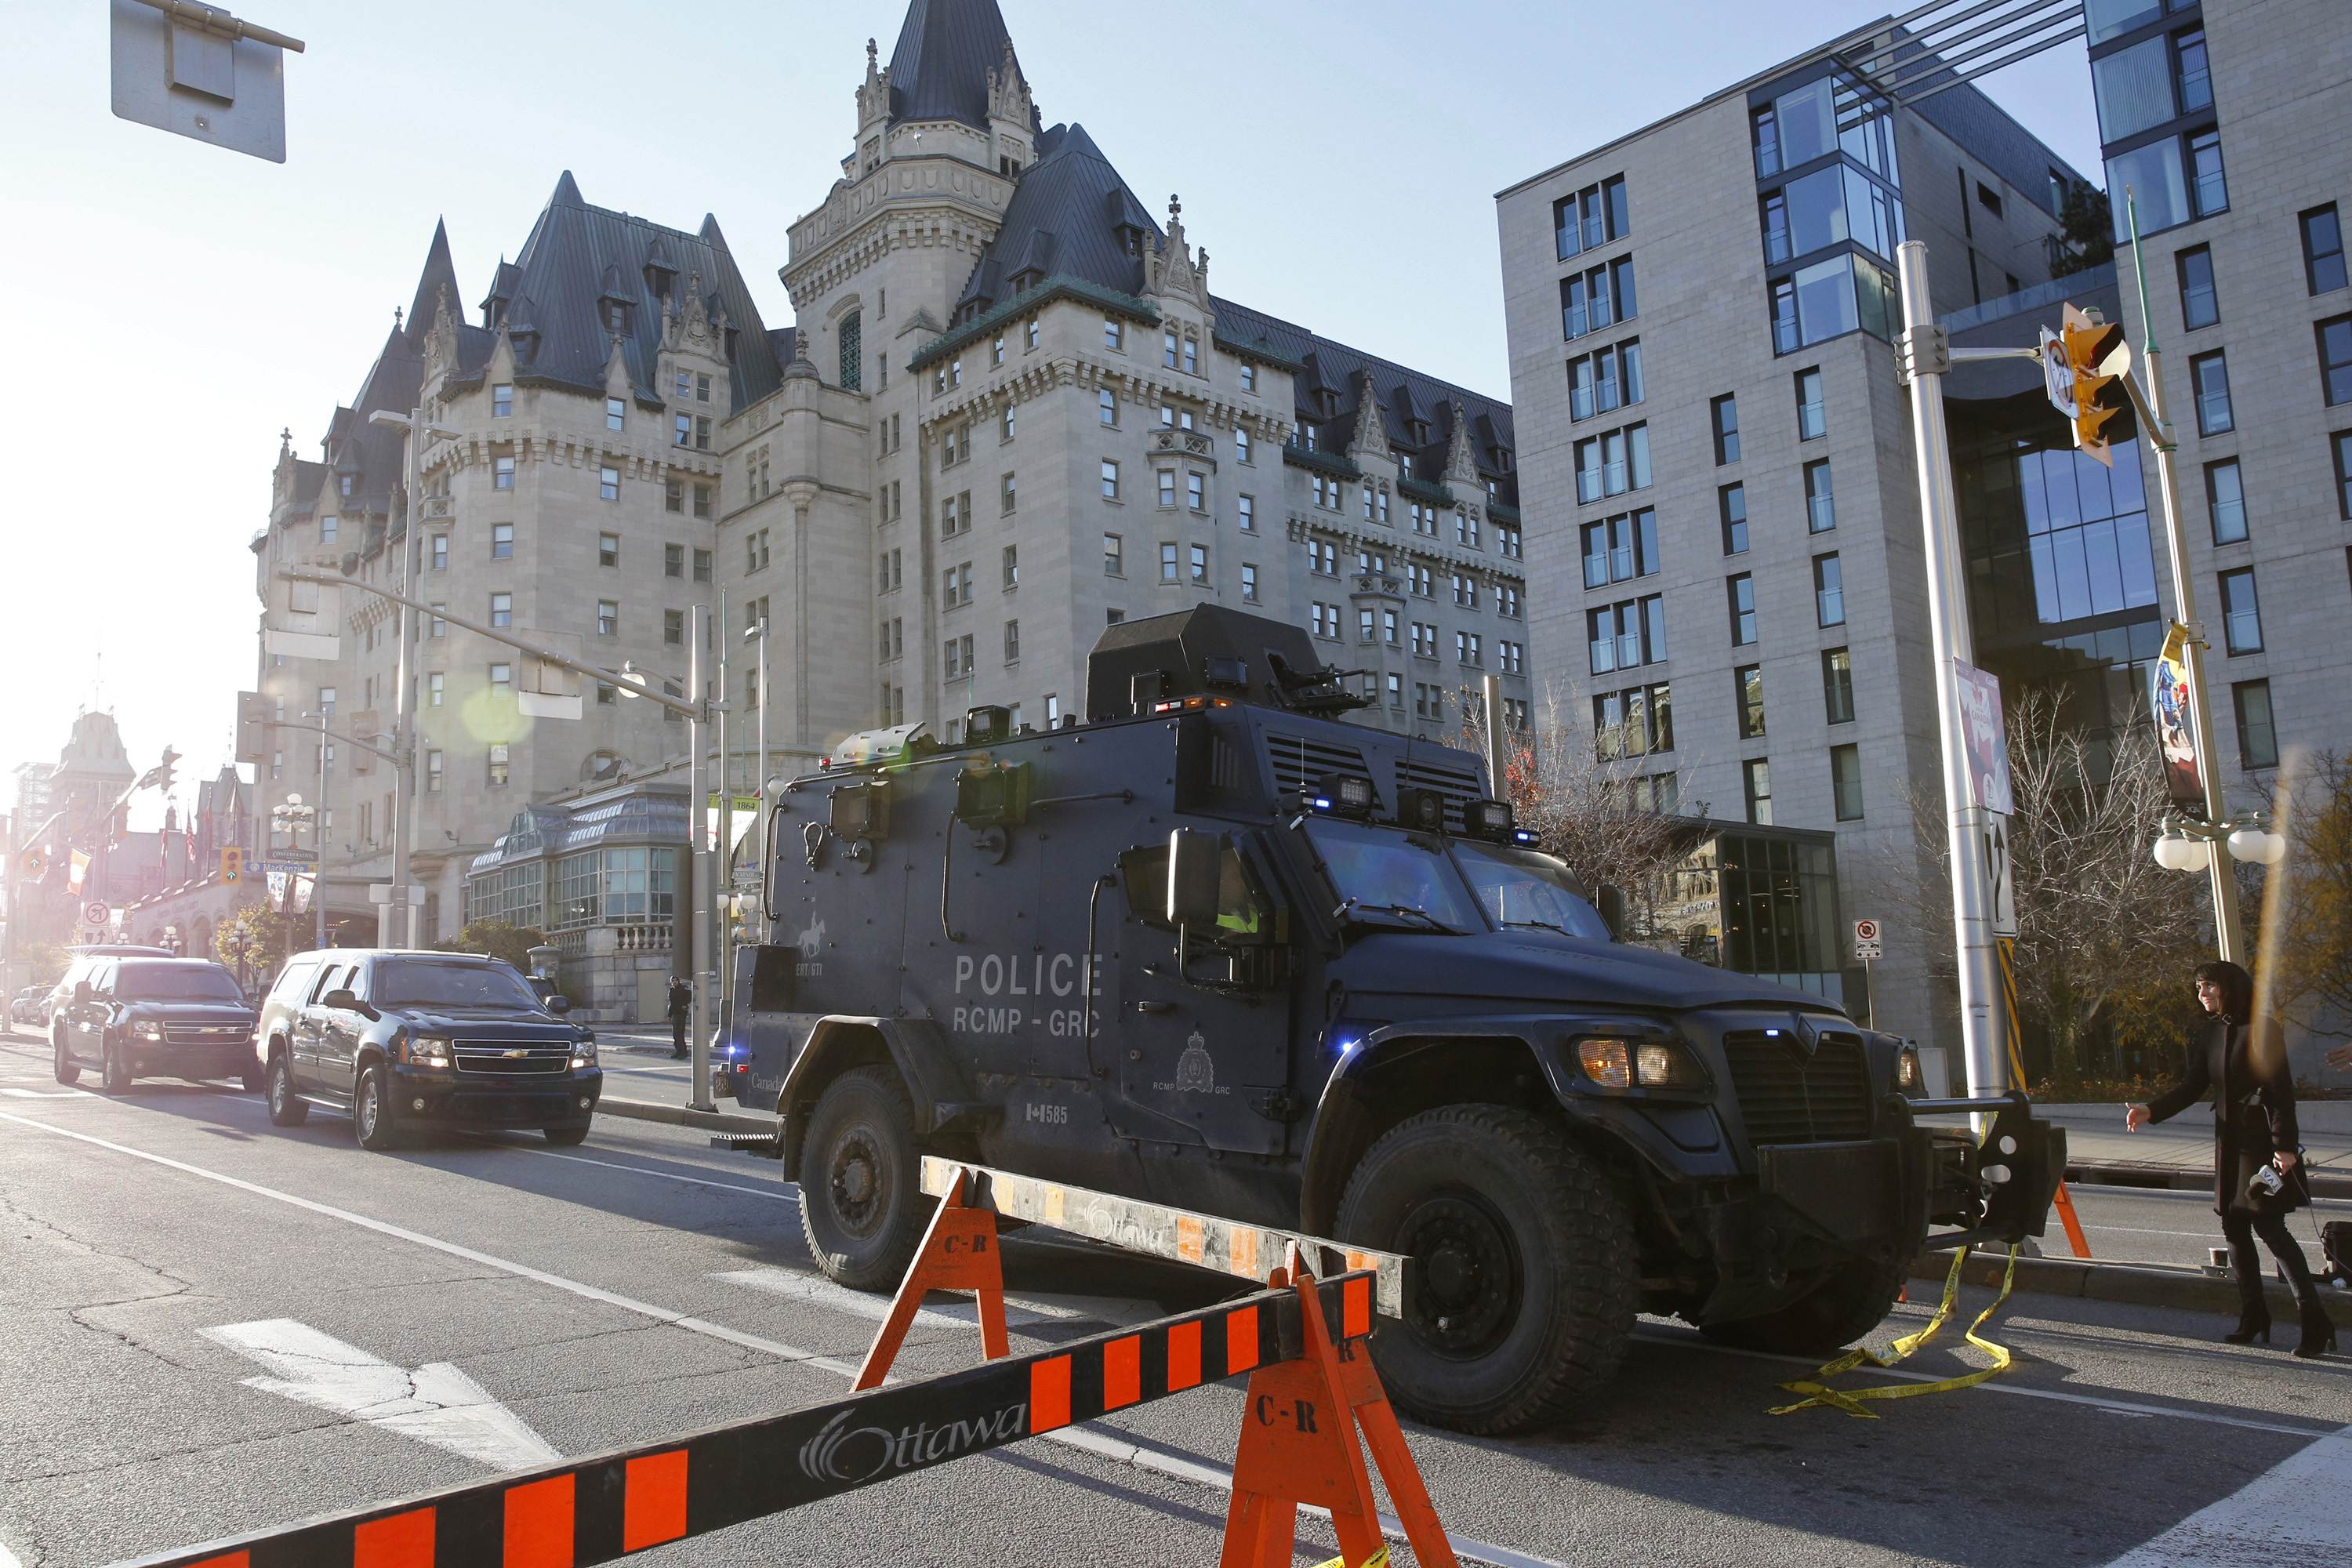 PM Harper says attacks will not intimidate Canada